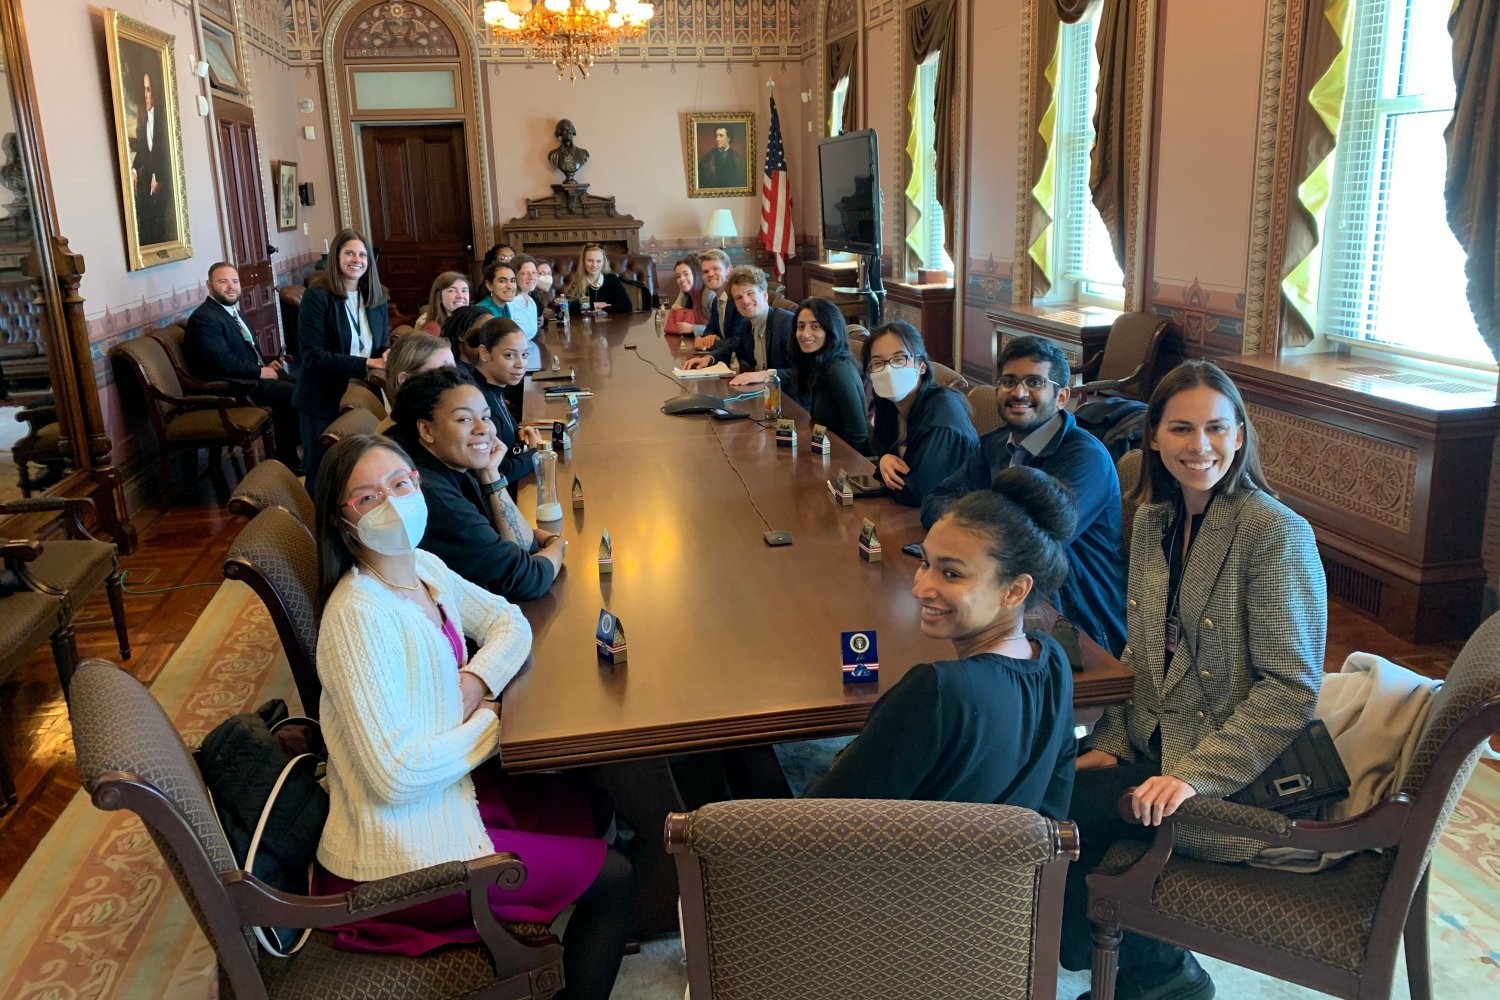 Former U.S. CTO Megan Smith shared with the students that one of her memories of convening in this room in the Eisenhower Executive Office Building was in response to the Ebola pandemic. 